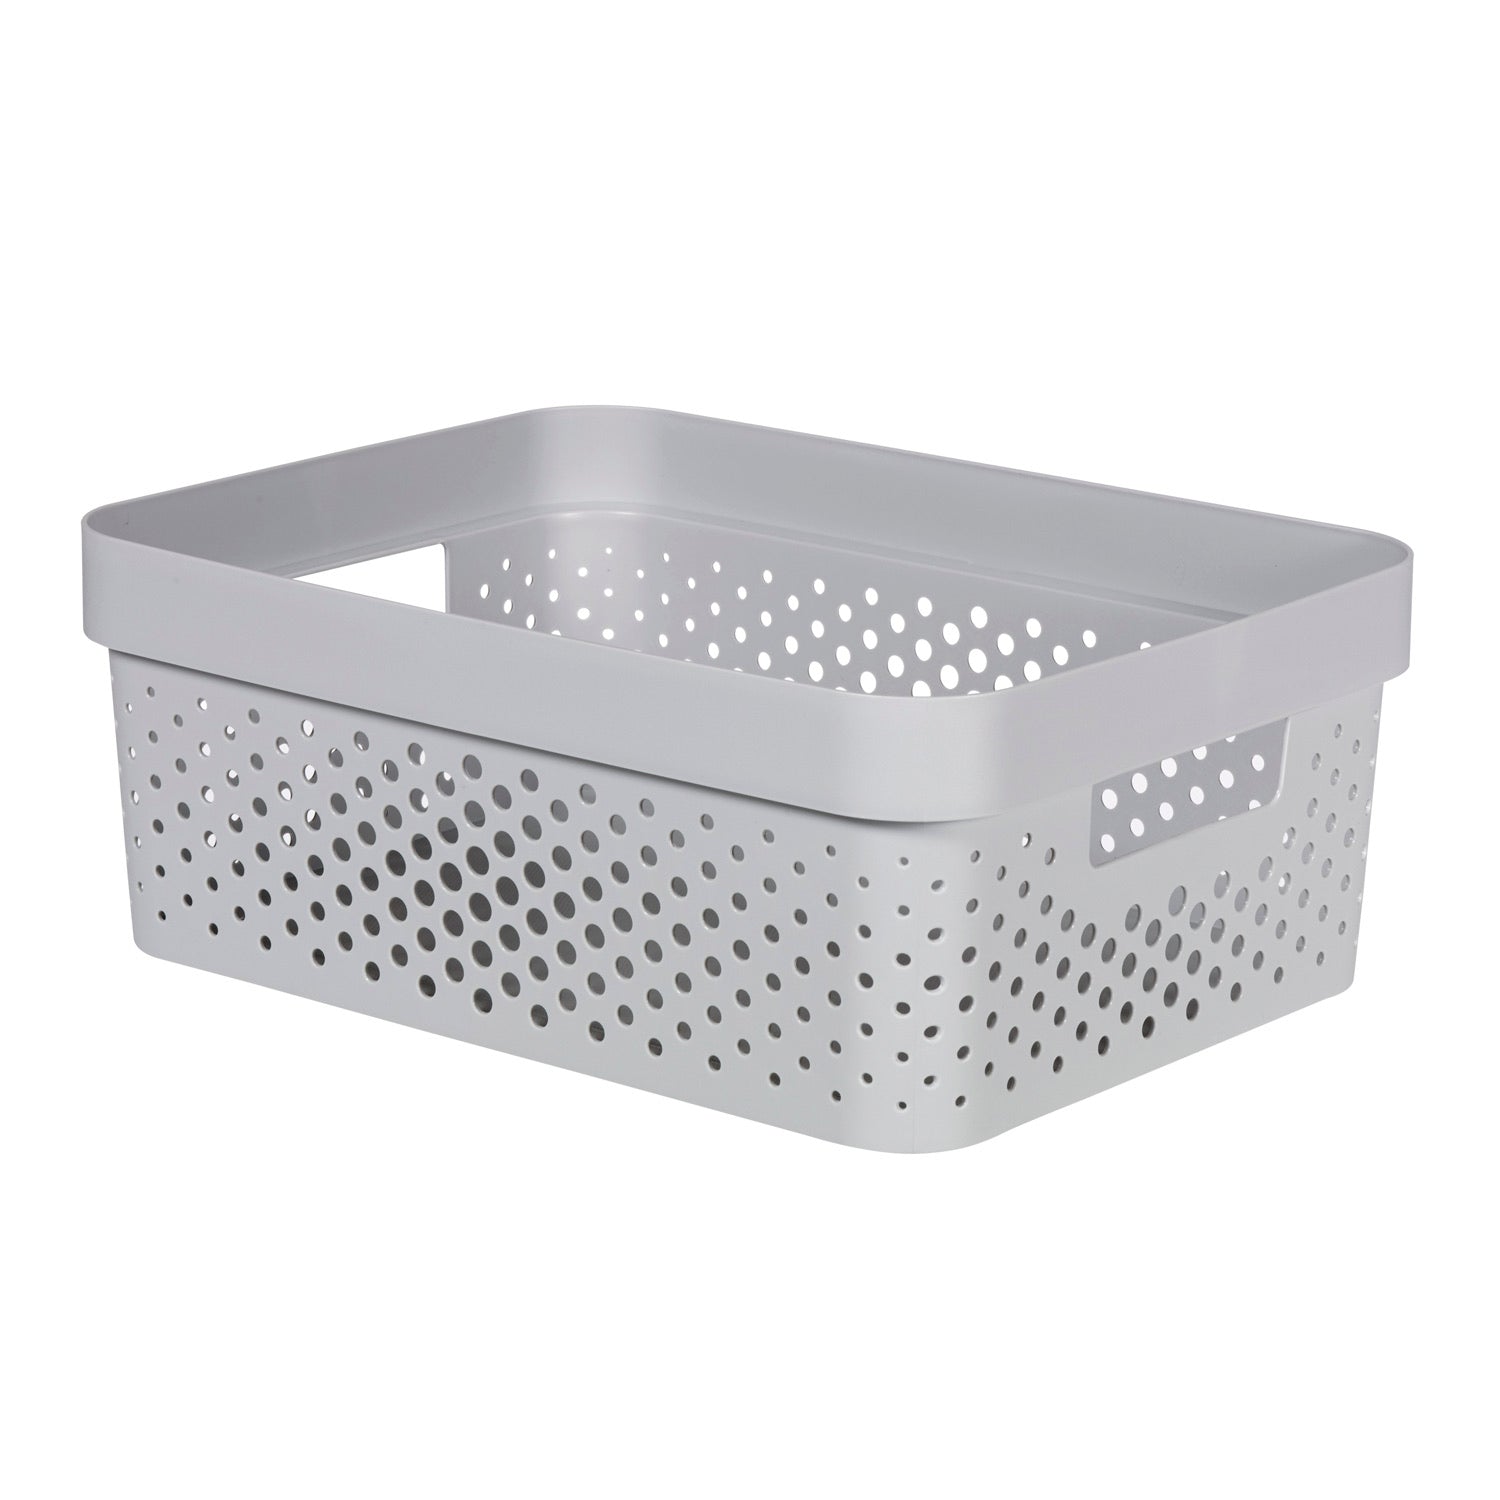 Curver Medium Infinity Box w/ Lid Light Grey, 14 x 10-1/2 x 5-3/8 H | The Container Store